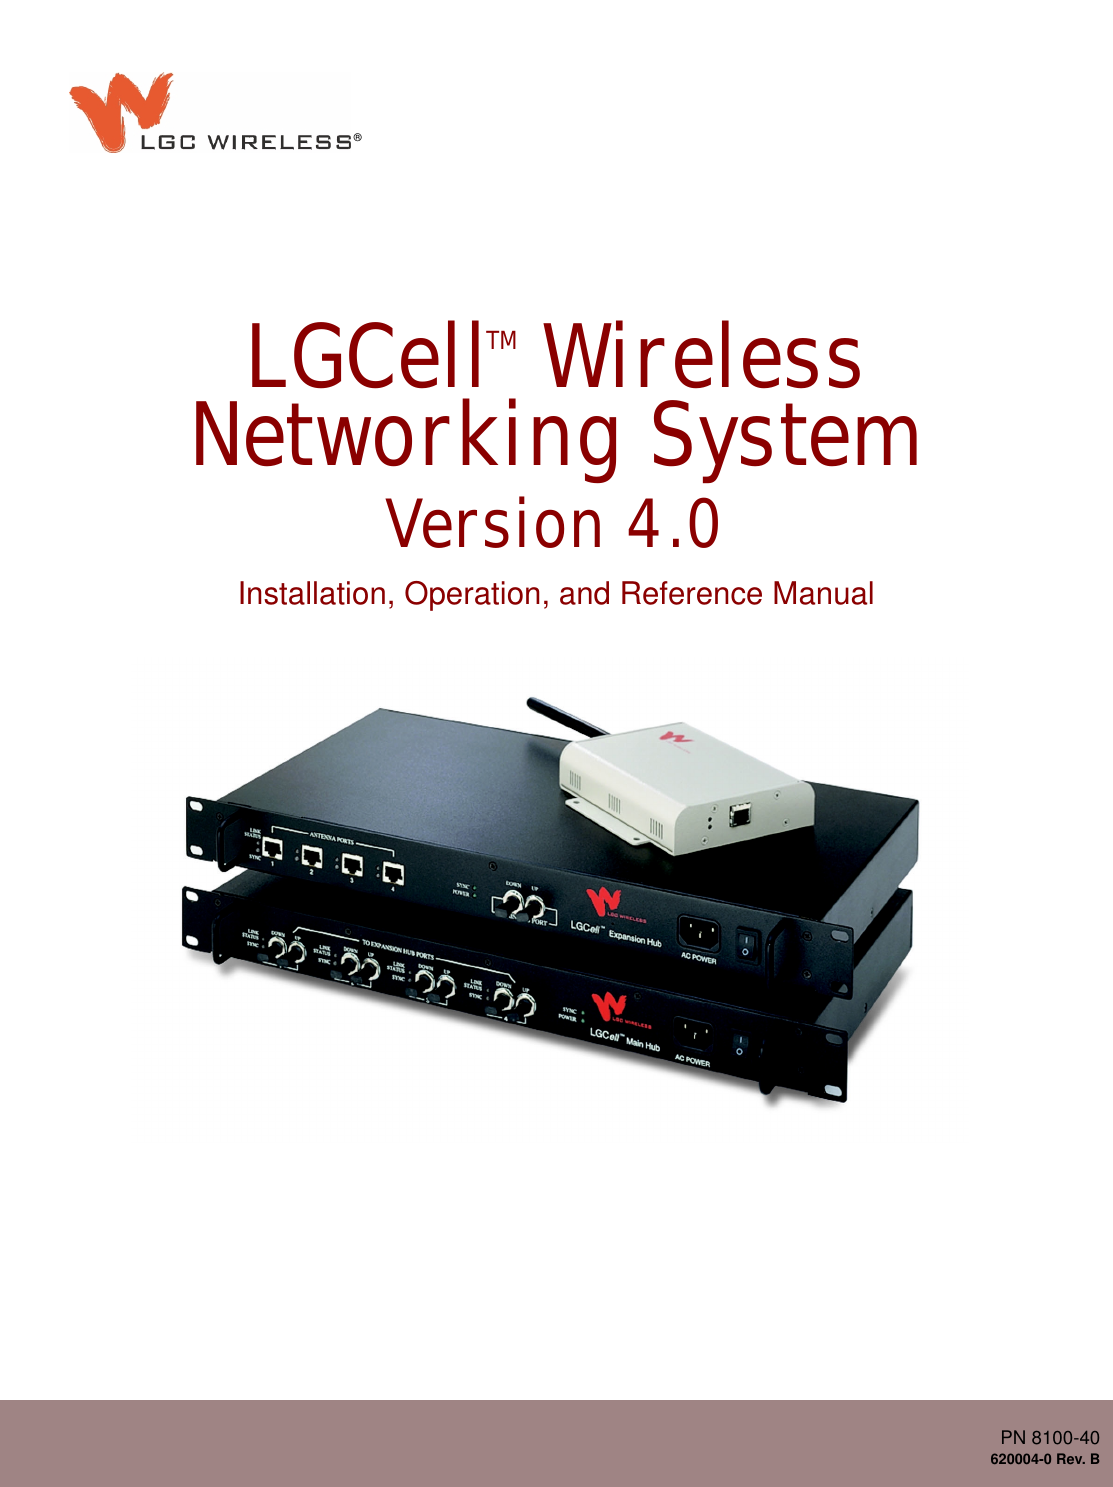 LGCell WirelessNetworking SystemVersion 4.0TM®Installation, Operation, and Reference ManualPN 8100-40620004-0 Rev. B